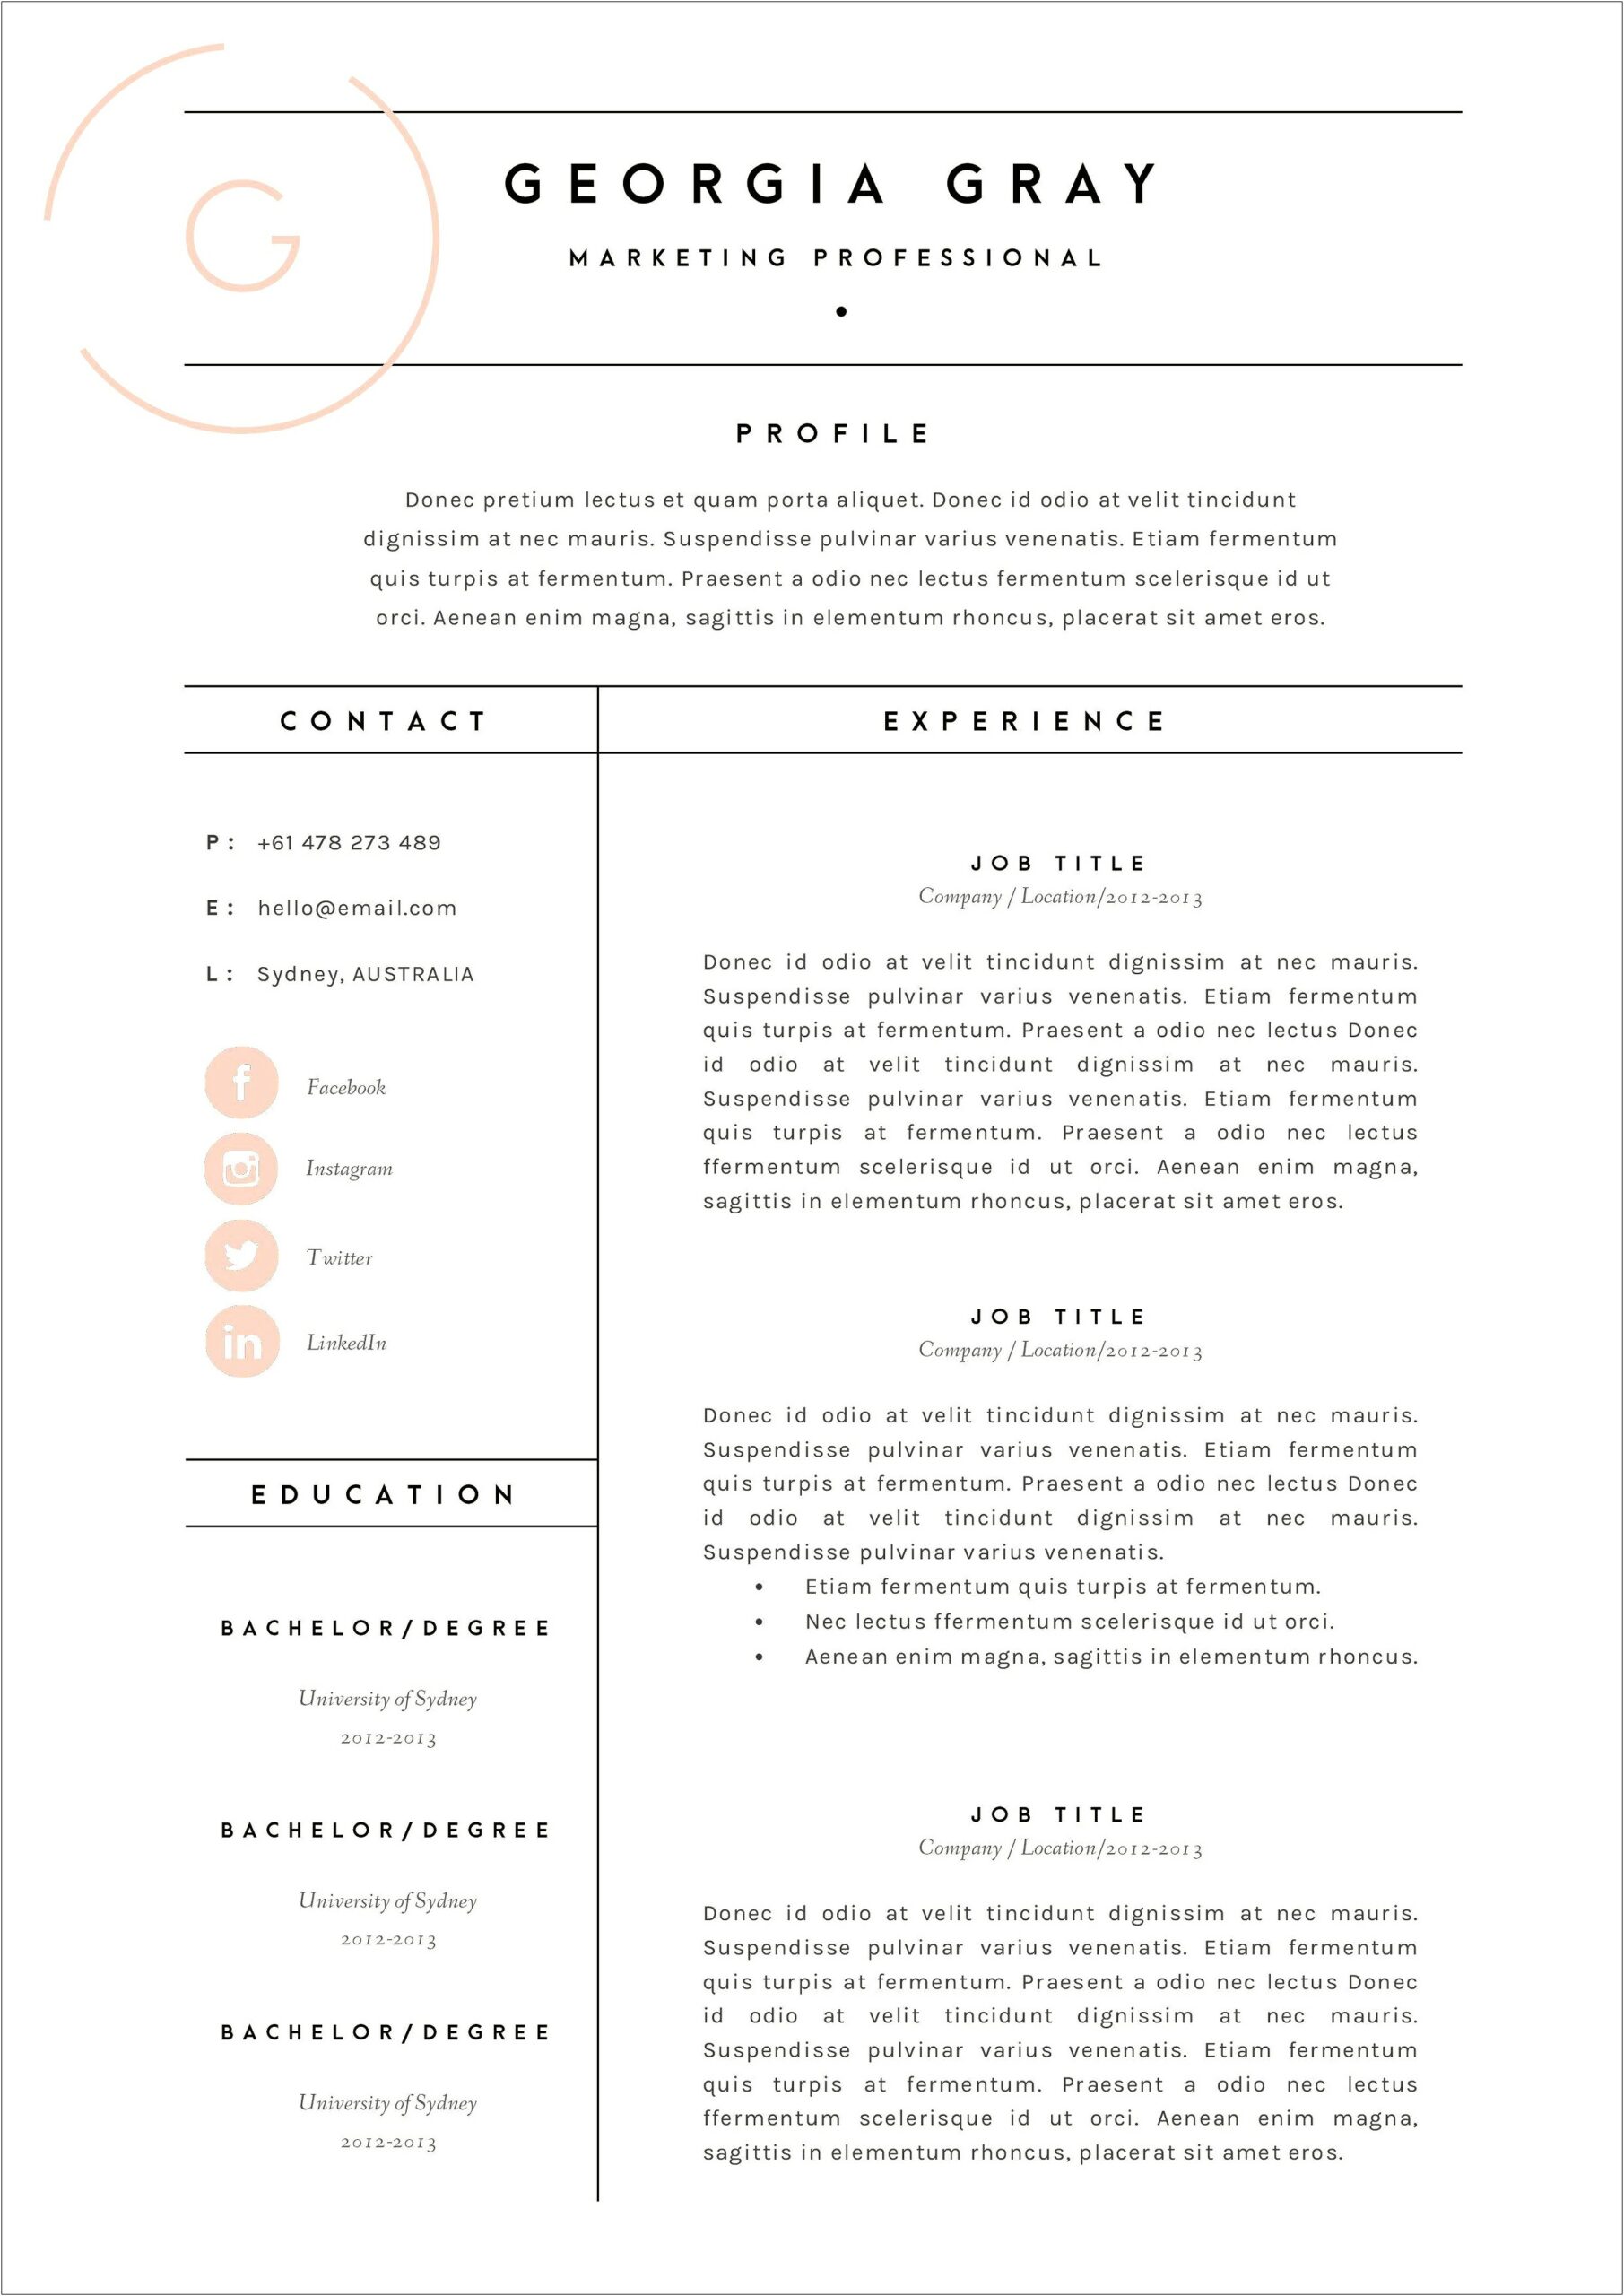 Cover Letter For Resumes Credit Card Company